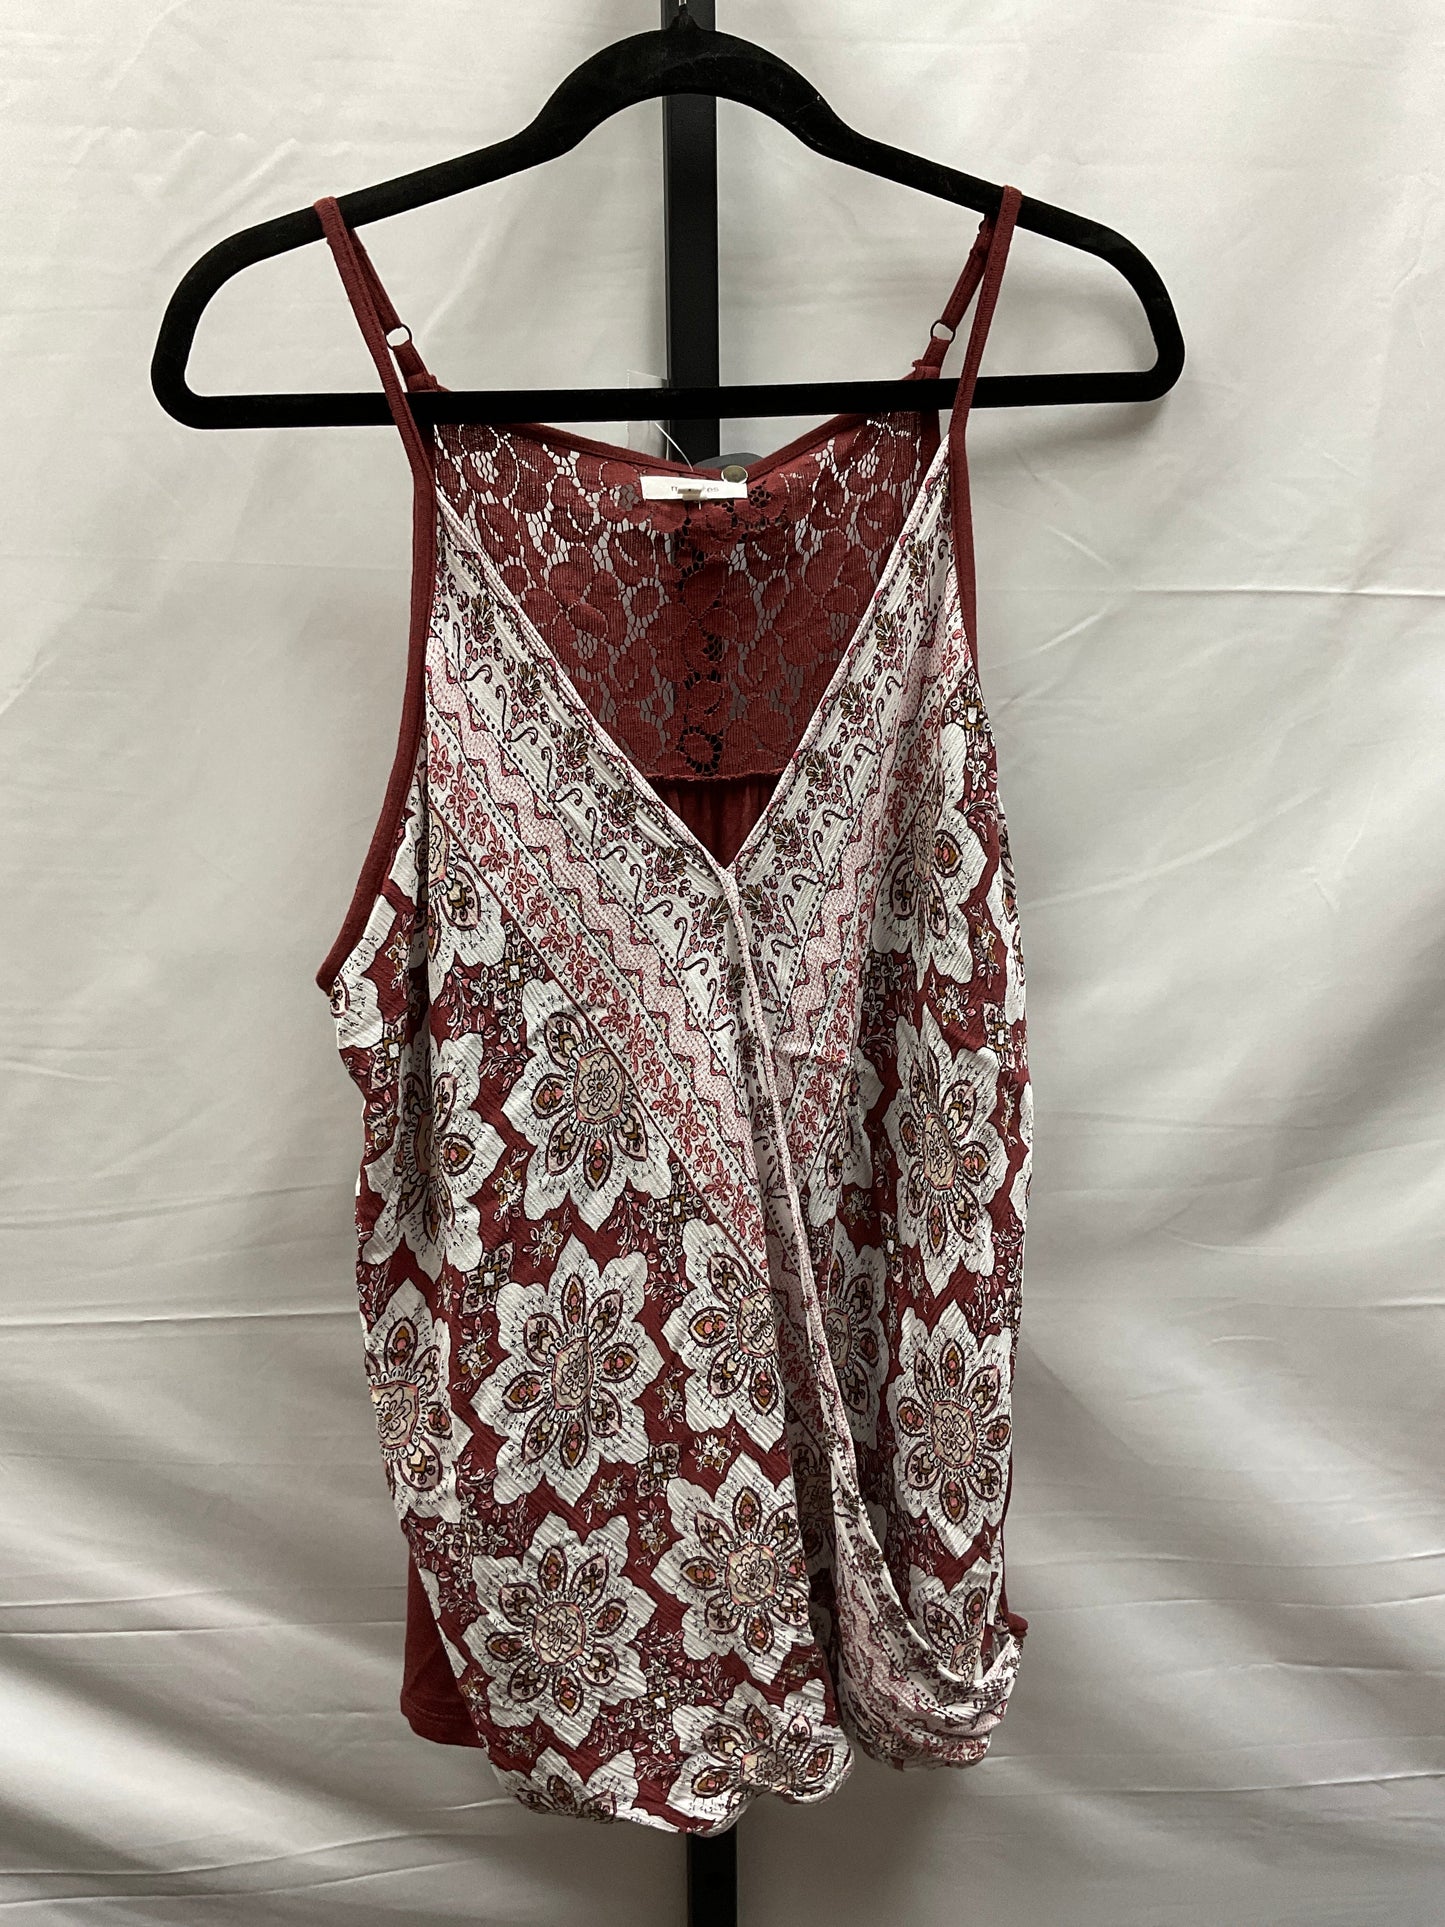 Floral Print Top Sleeveless Maurices, Size 1x